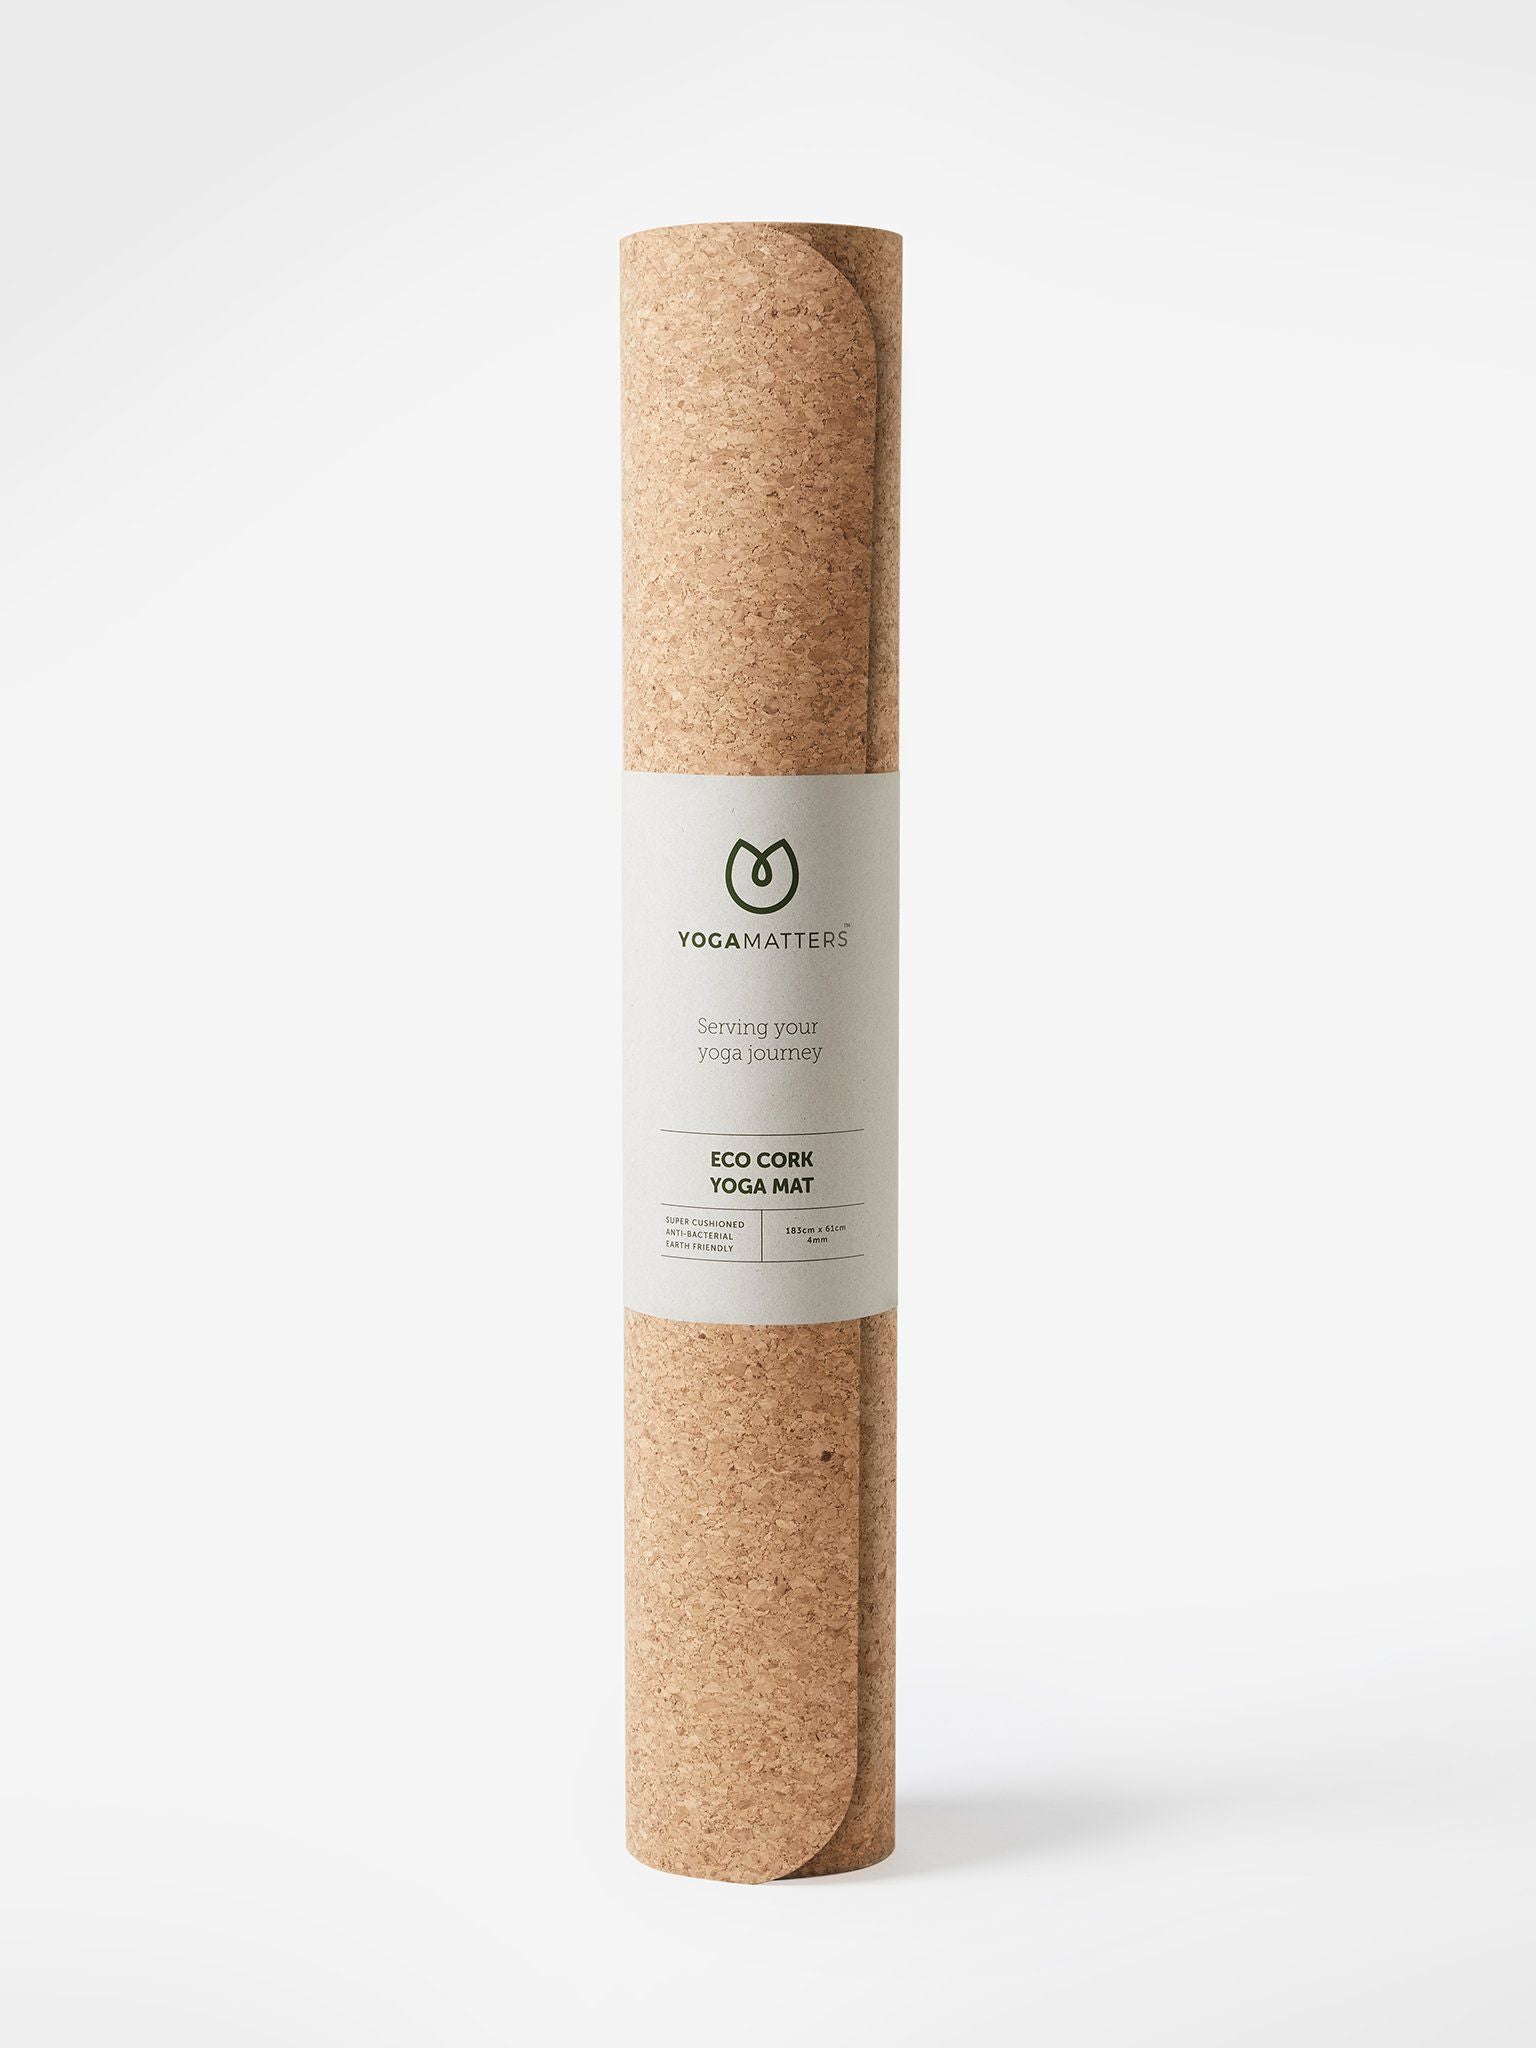 Yogamatters eco cork yoga mat rolled up side view on white background